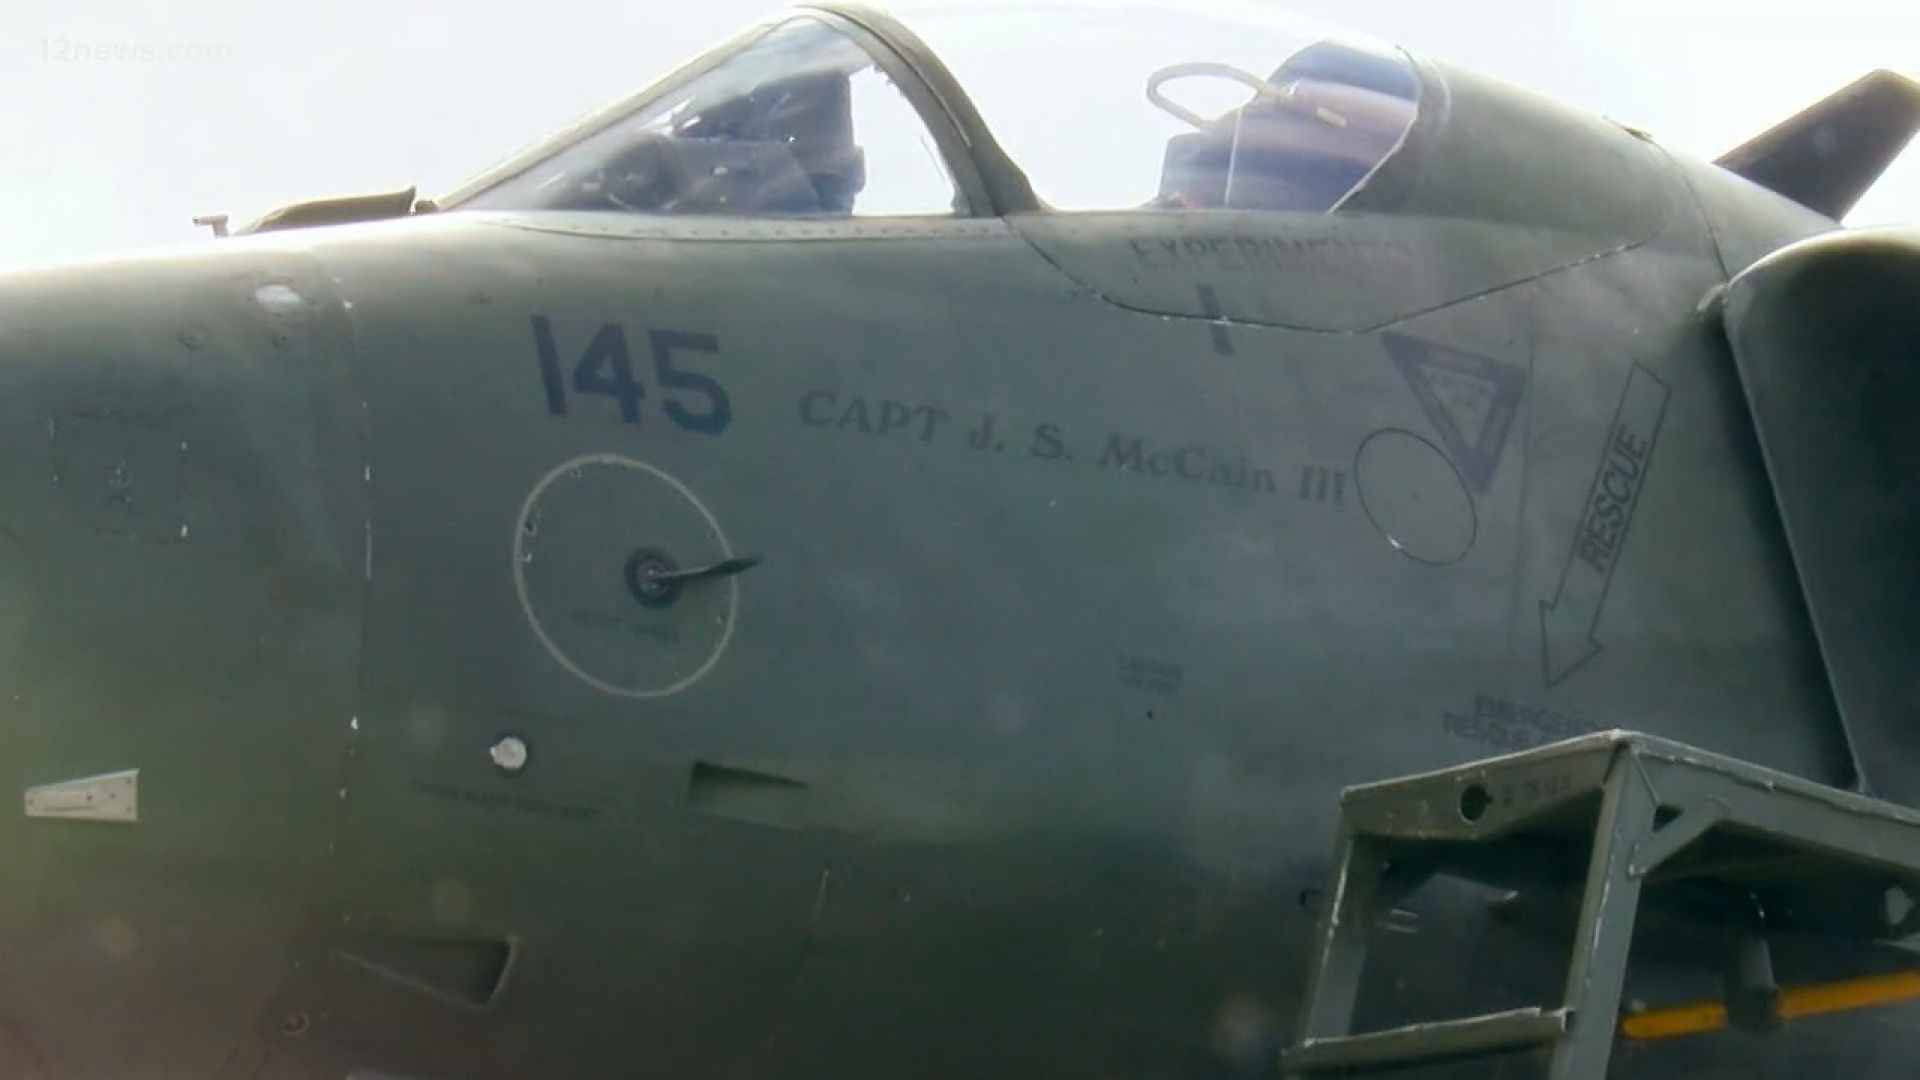 A 48-year-old aircraft flies around the country helping to train soldiers, airmen, and marines in honor of Arizona's late Senator John McCain. We check out the plane, the same kind that McCain flew when he got shot down in Vietnam.